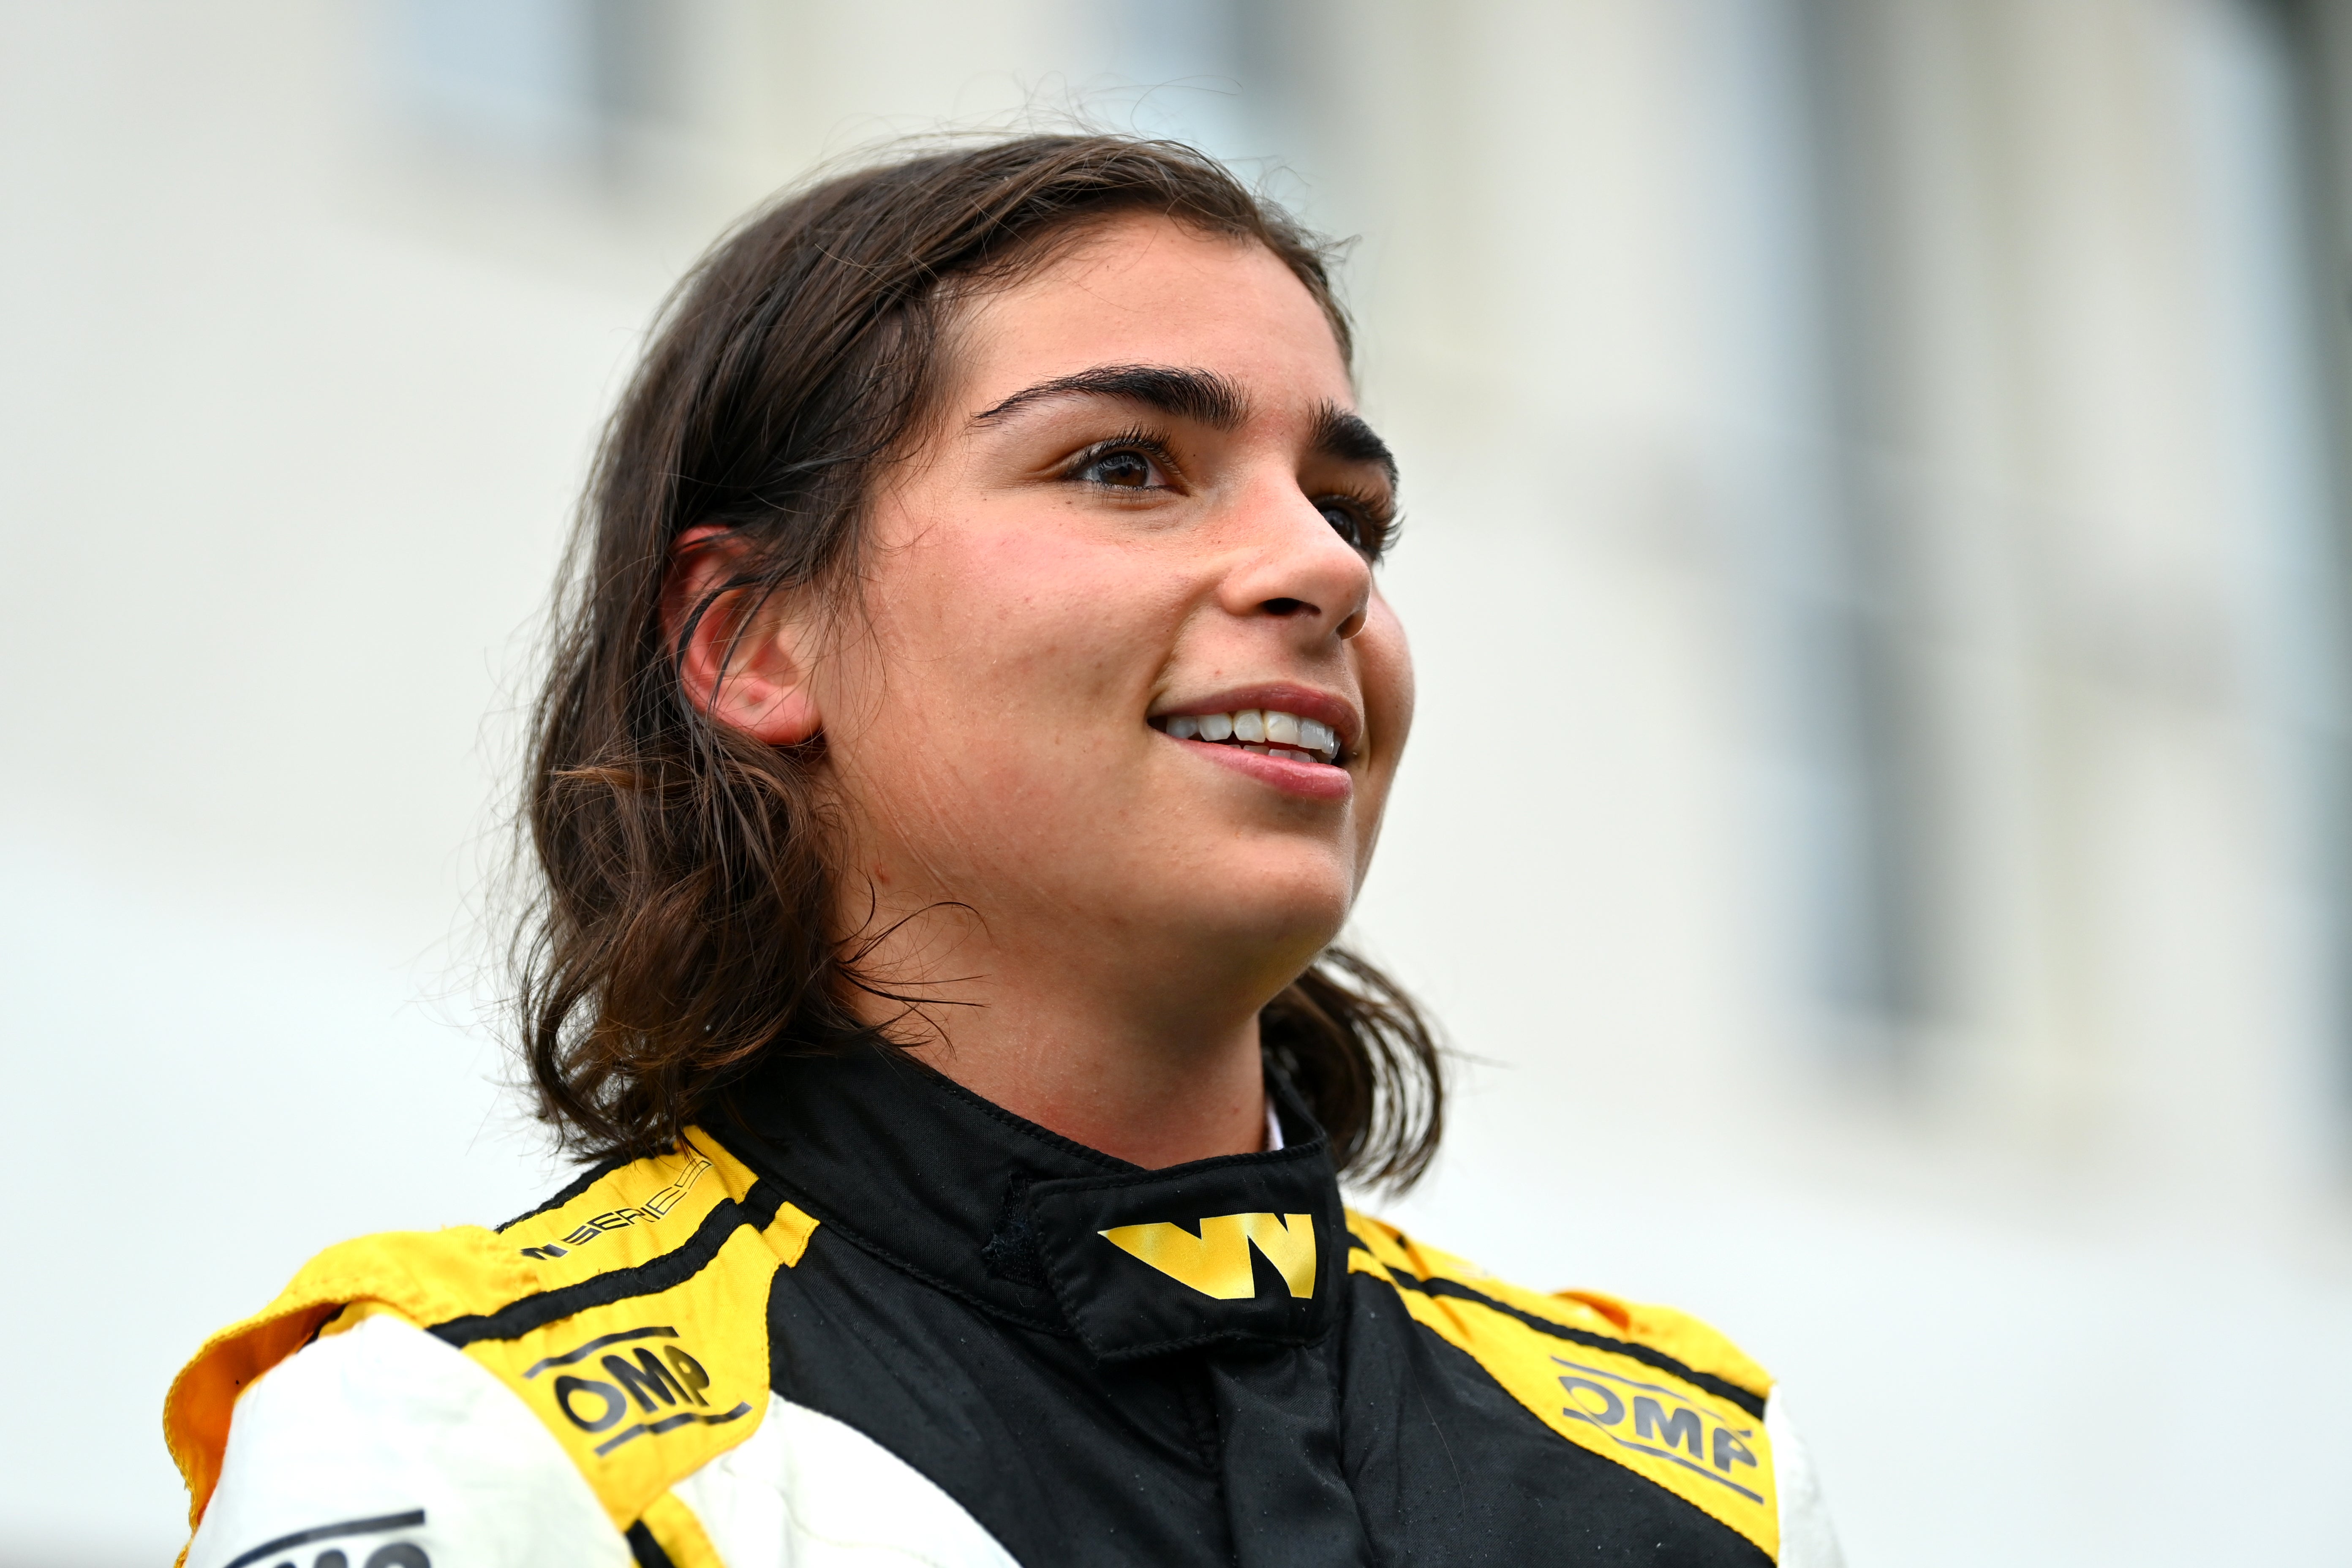 Jamie Chadwick is relishing the new opportunity presented to her by Andretti in Indy NXT